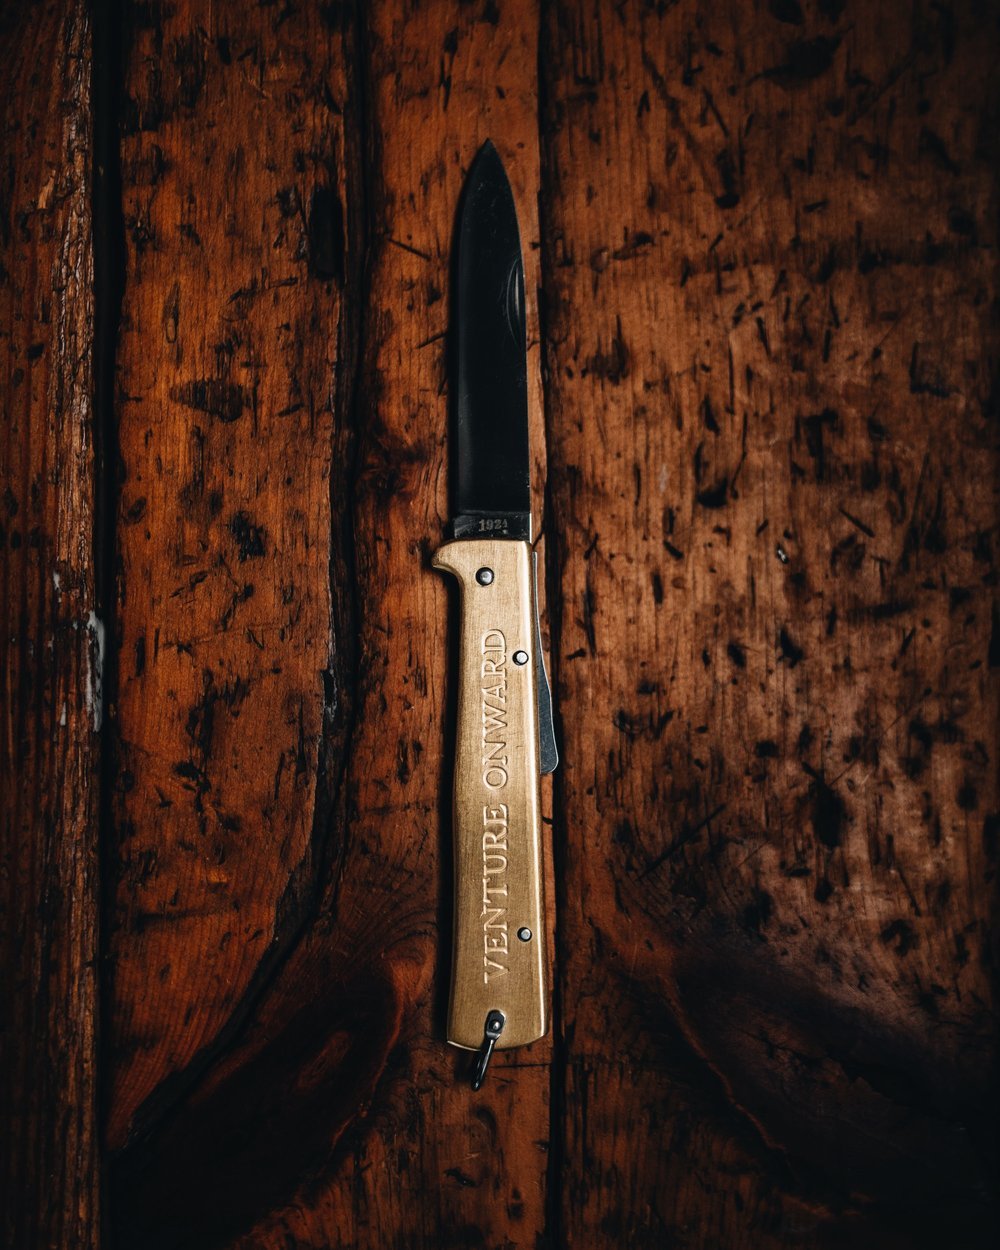 The @1924us solid brass Mercator pocket knife.